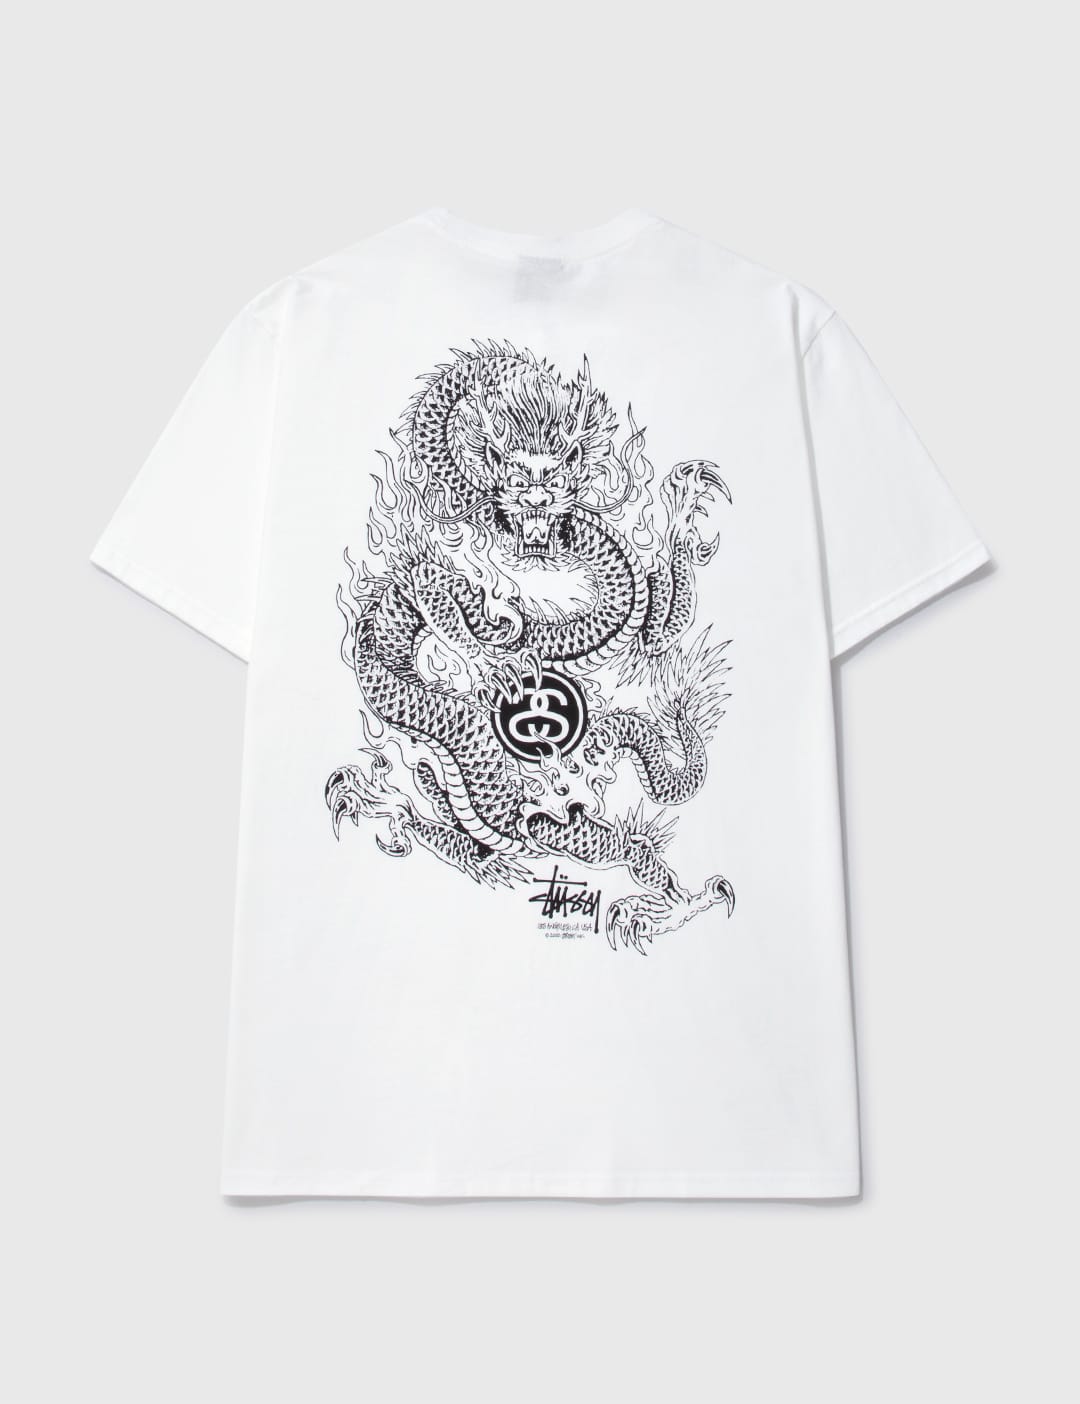 Stüssy - DRAGON T-SHIRT | HBX - Globally Curated Fashion and